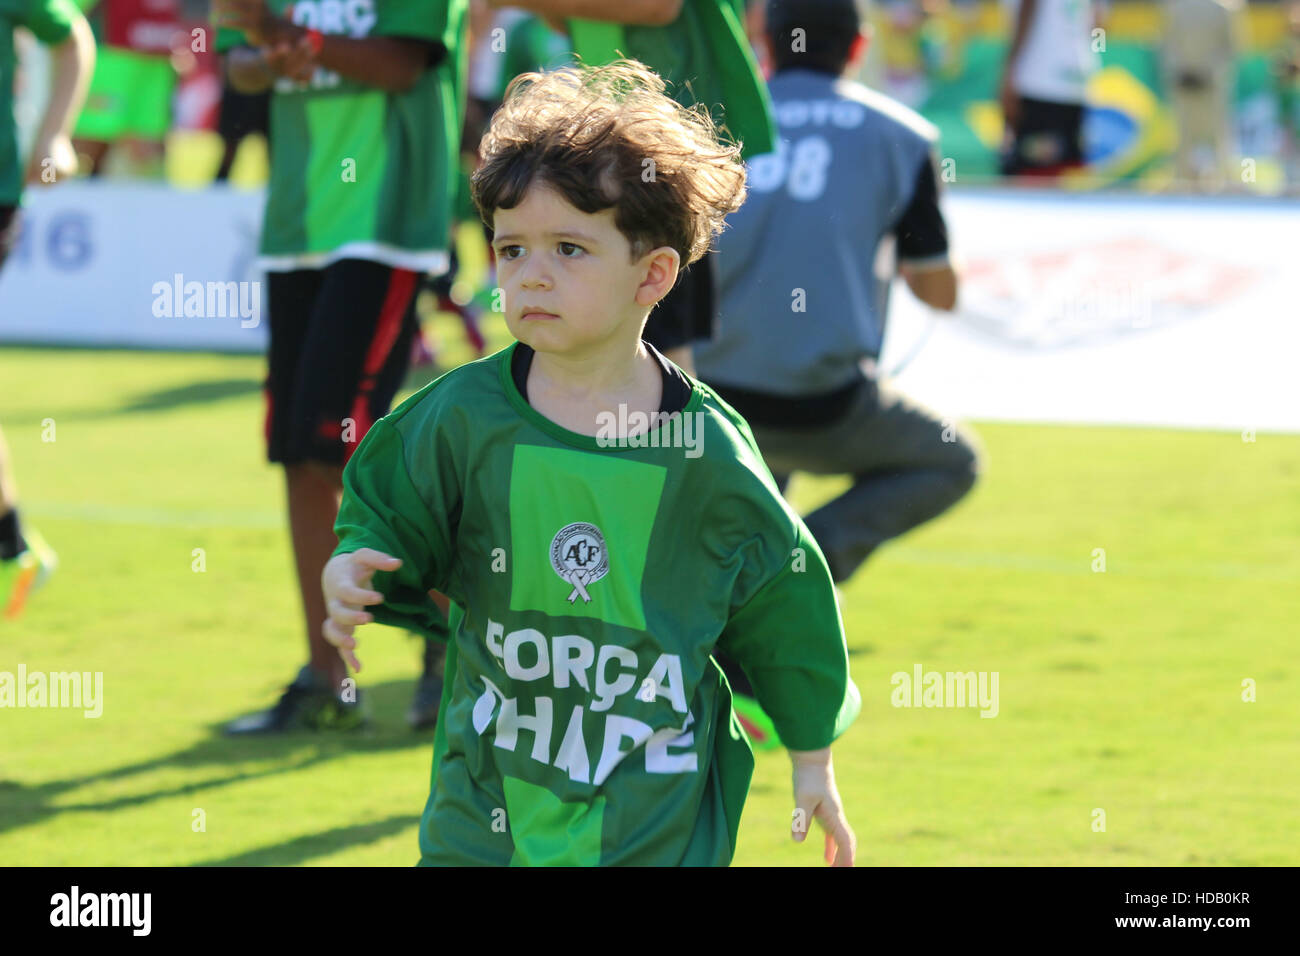 Salvador, Brazil. 11th Dec, 2016. Child with shirt in honor of Chapecoense before departure Victory x Palmeiras held at Barradão (Barradão) in Salvador, valid for 38 Brazilian championship round Football Serie A in 2016. © Tiago Caldas/FotoArena/Alamy Live News Stock Photo